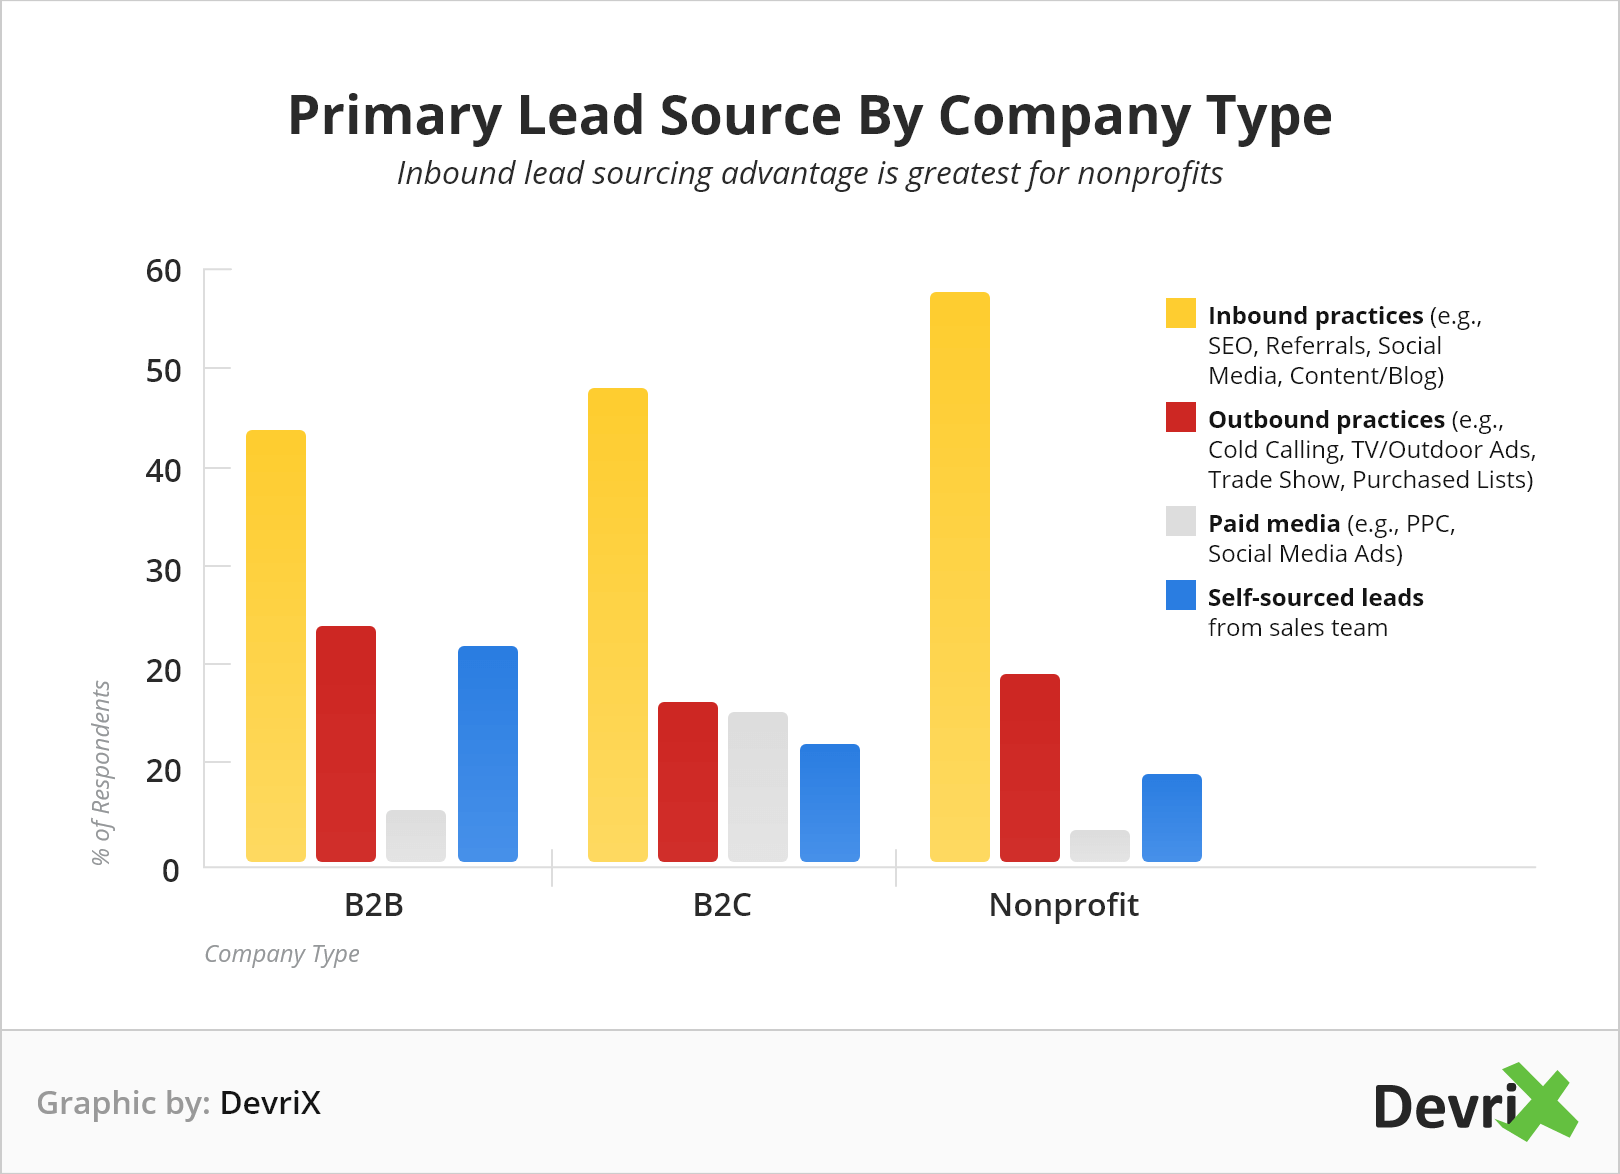 Primary Lead Source by Company Type